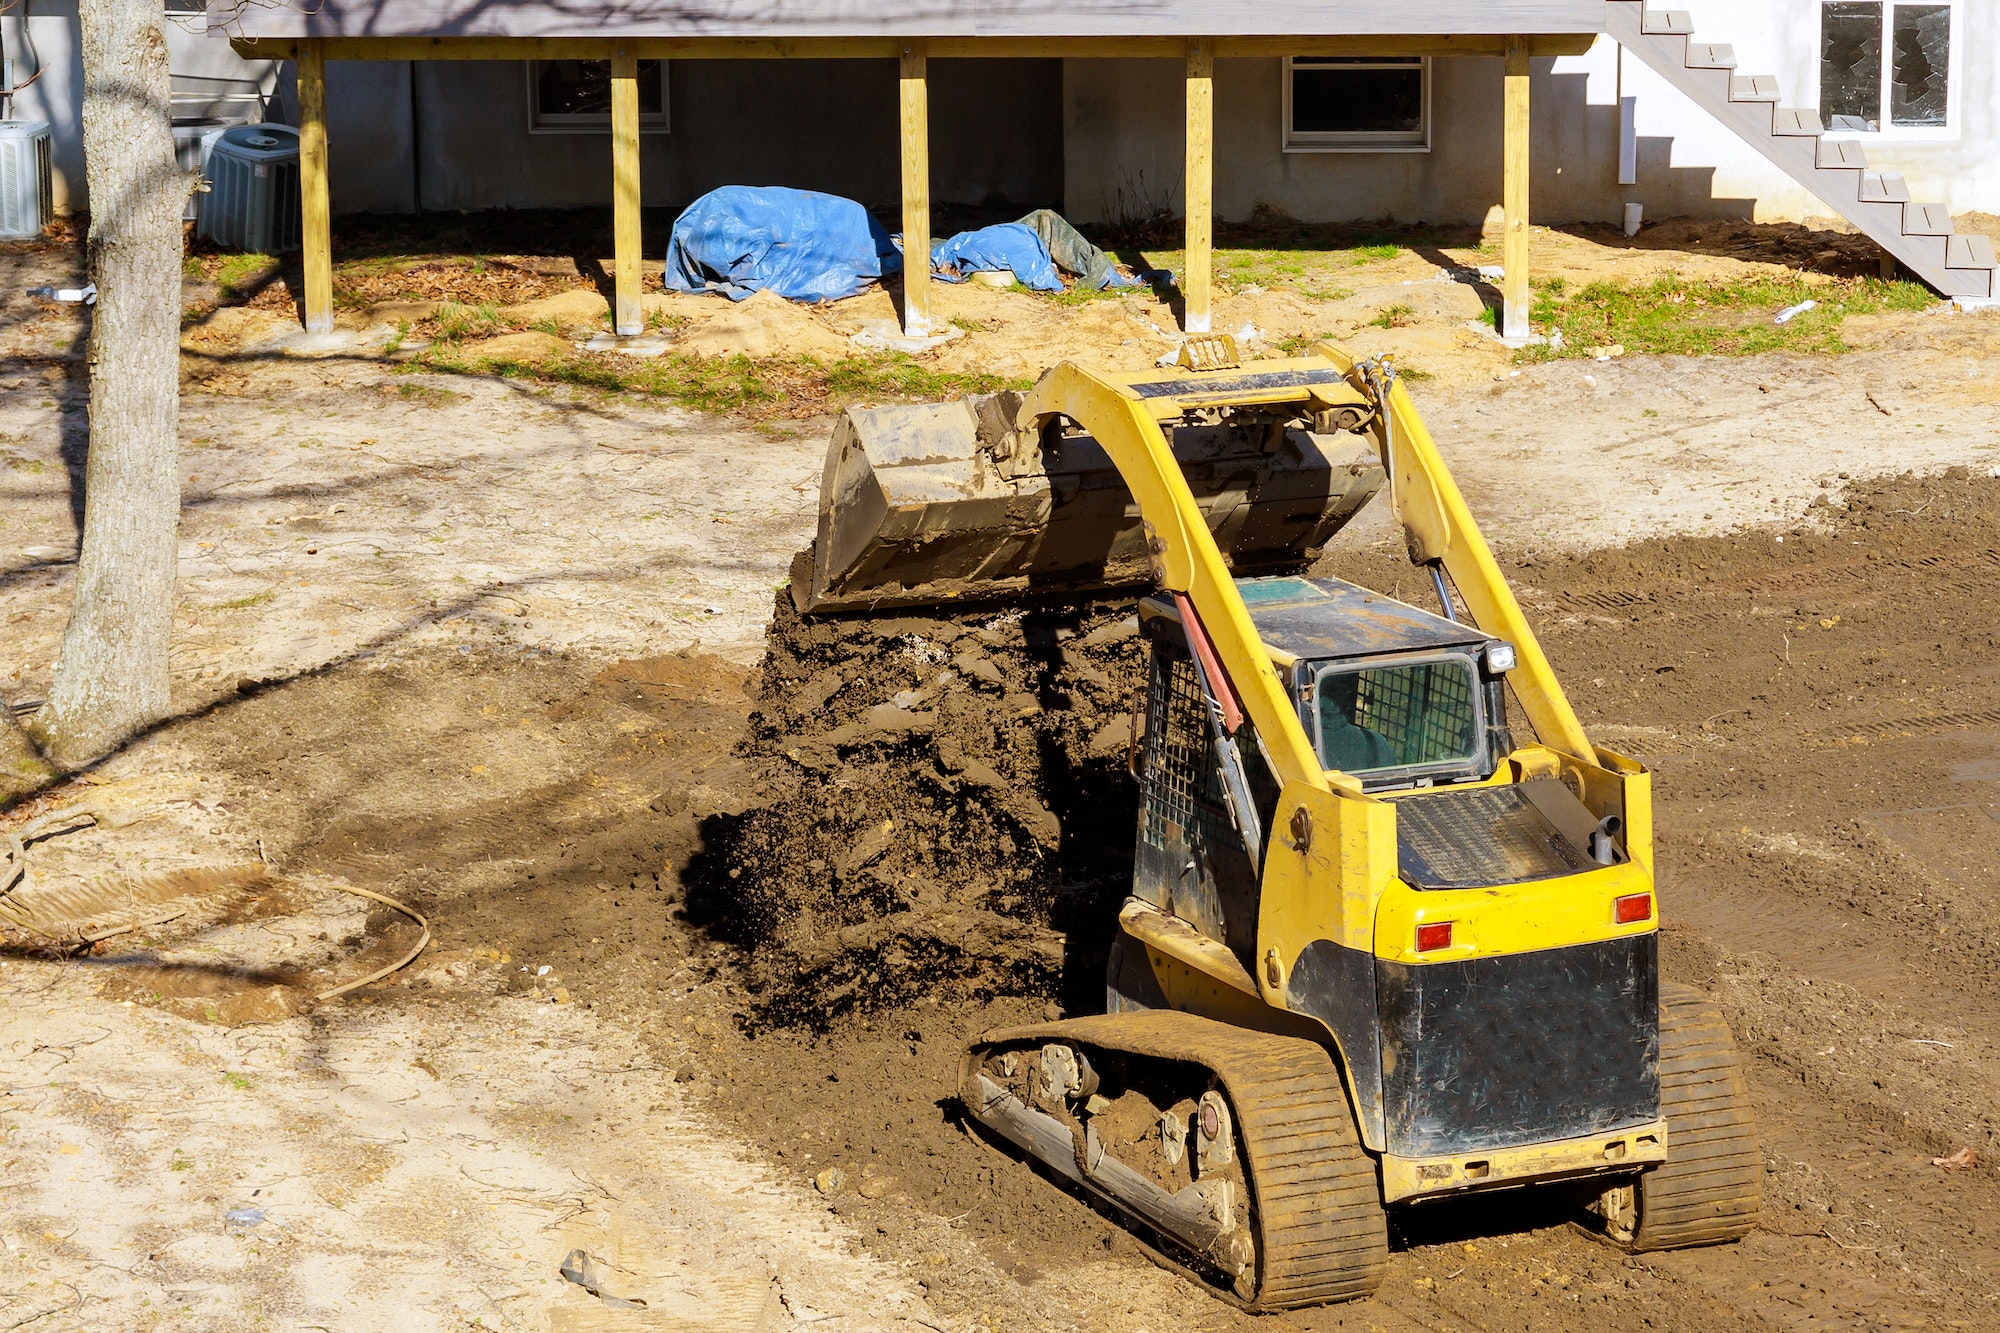 Bulldozer moving, leveling ground at construction site in ground using shovels